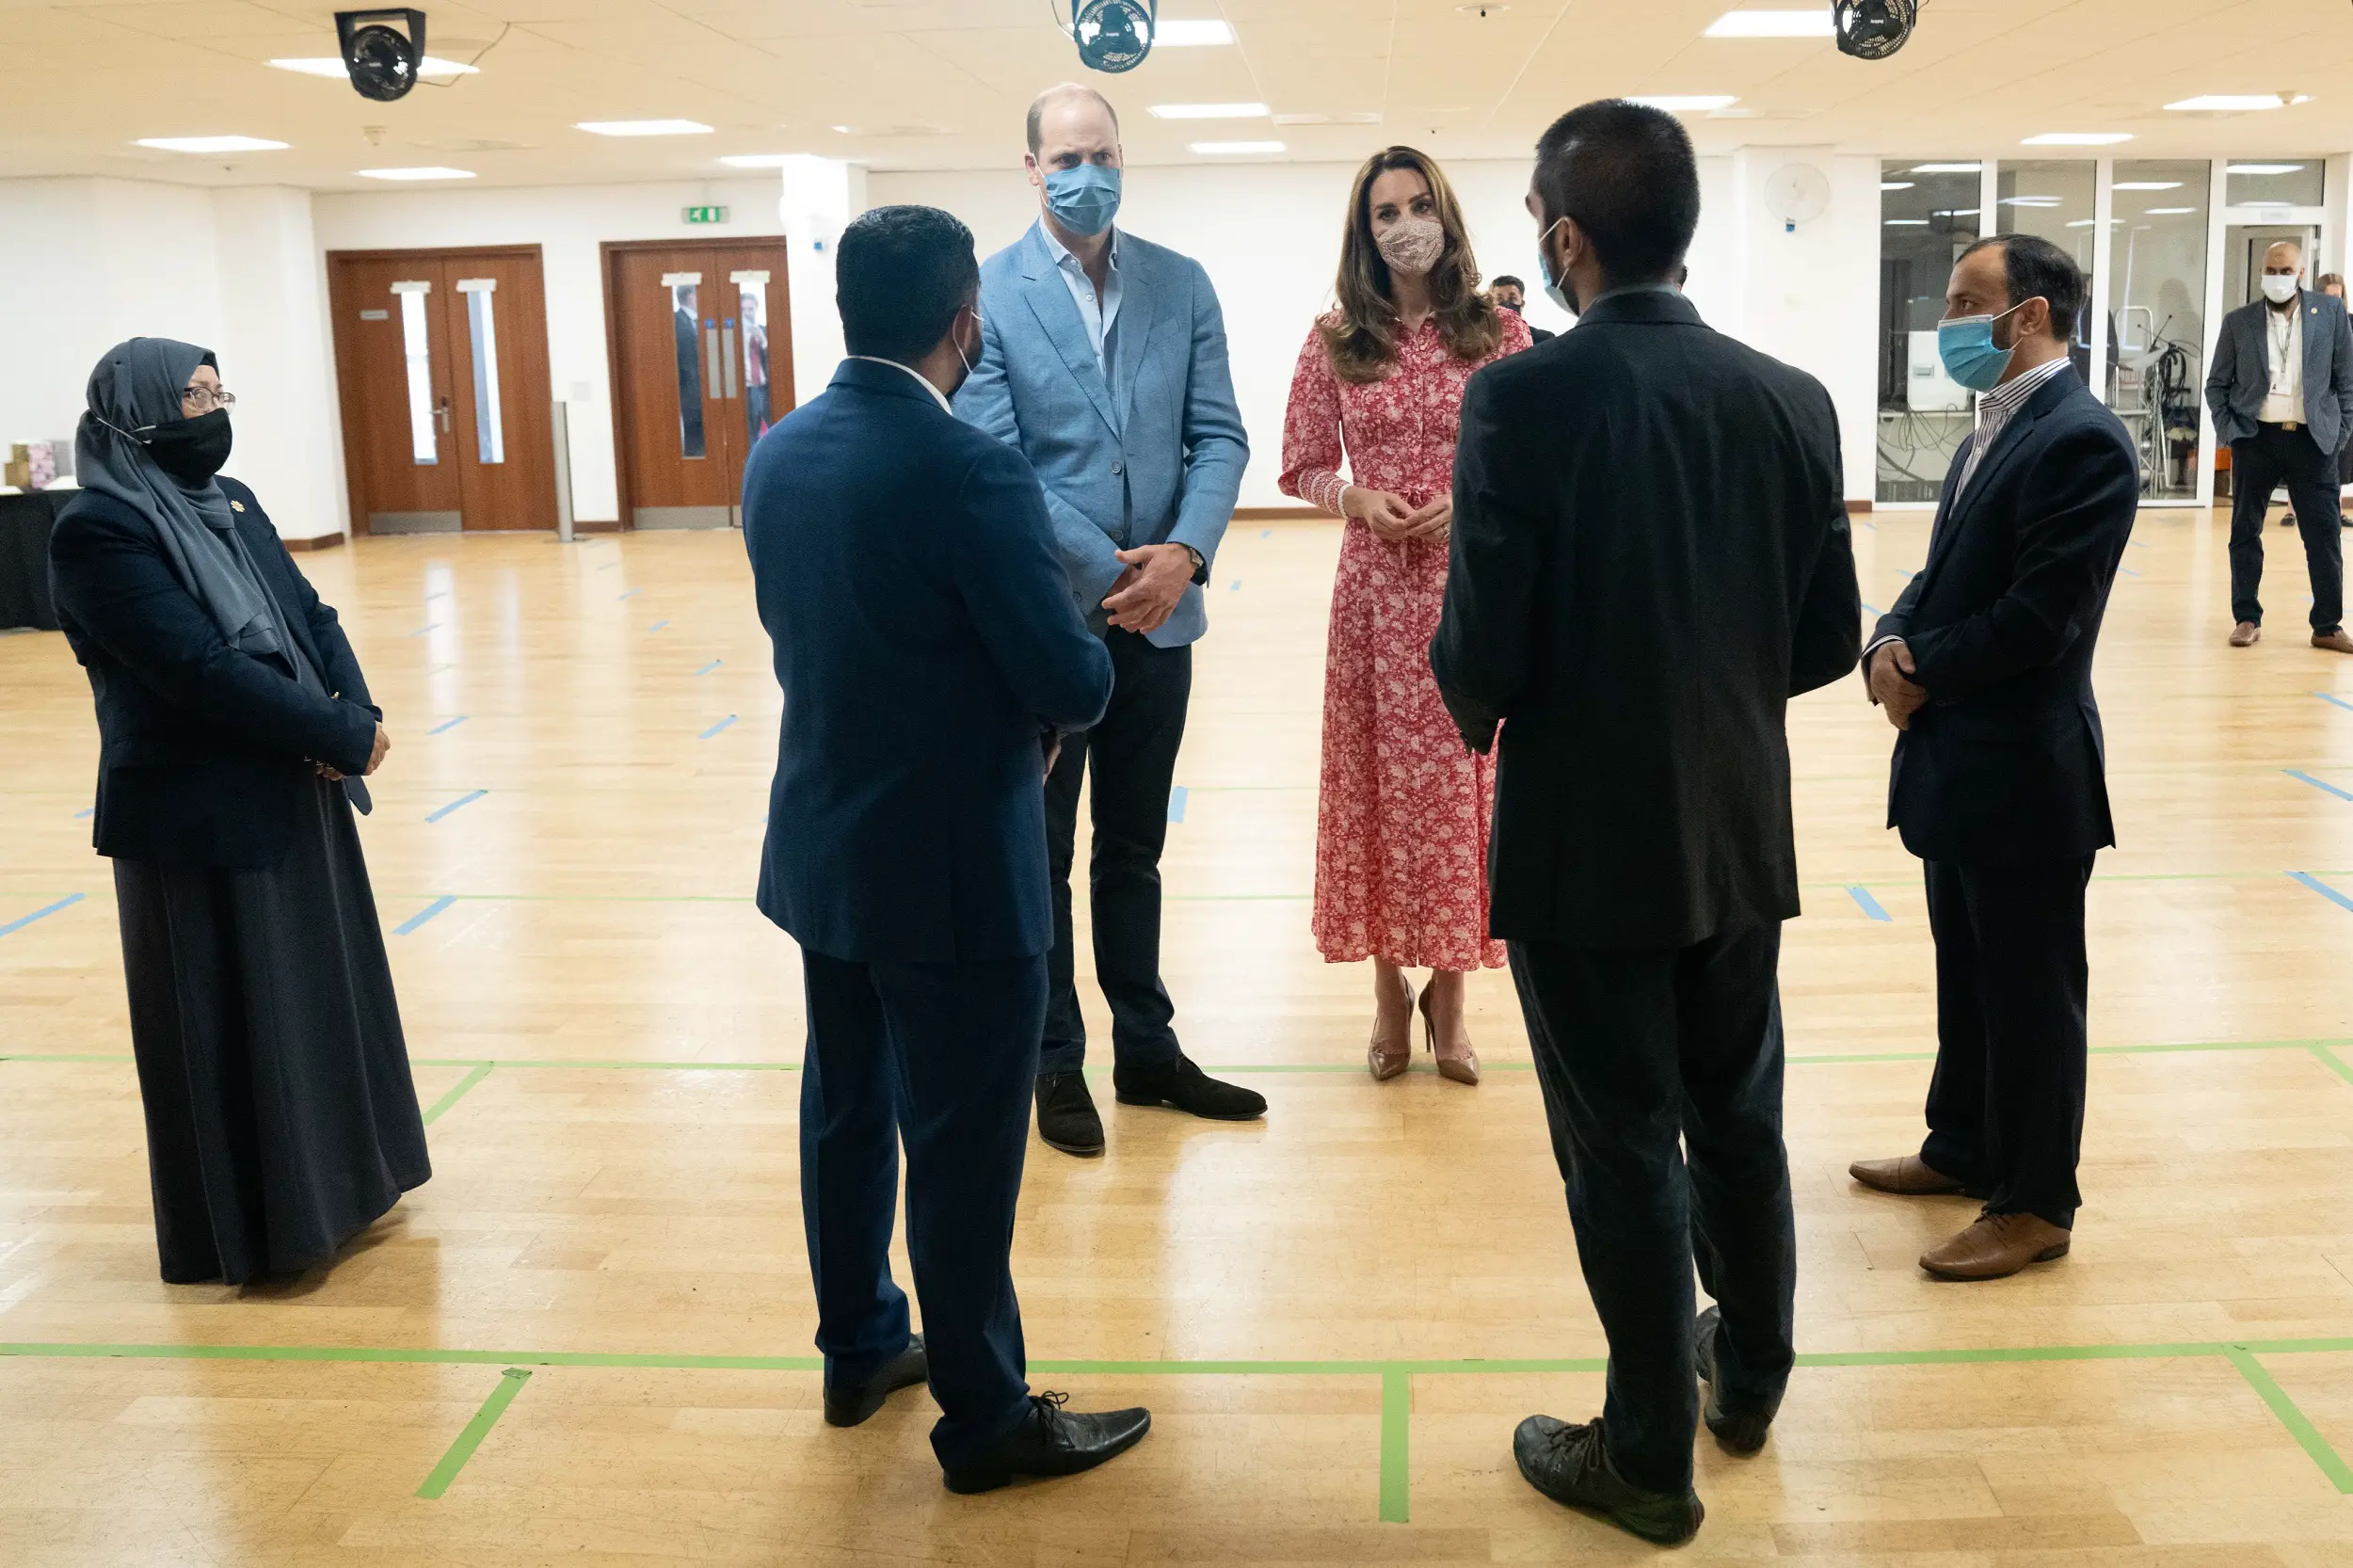 The Duke and Duchess of Cambridge met with the staff and beneficieries of The Duke and Duchess of Cambridge toured the East London Mosque and London Muslim Centre